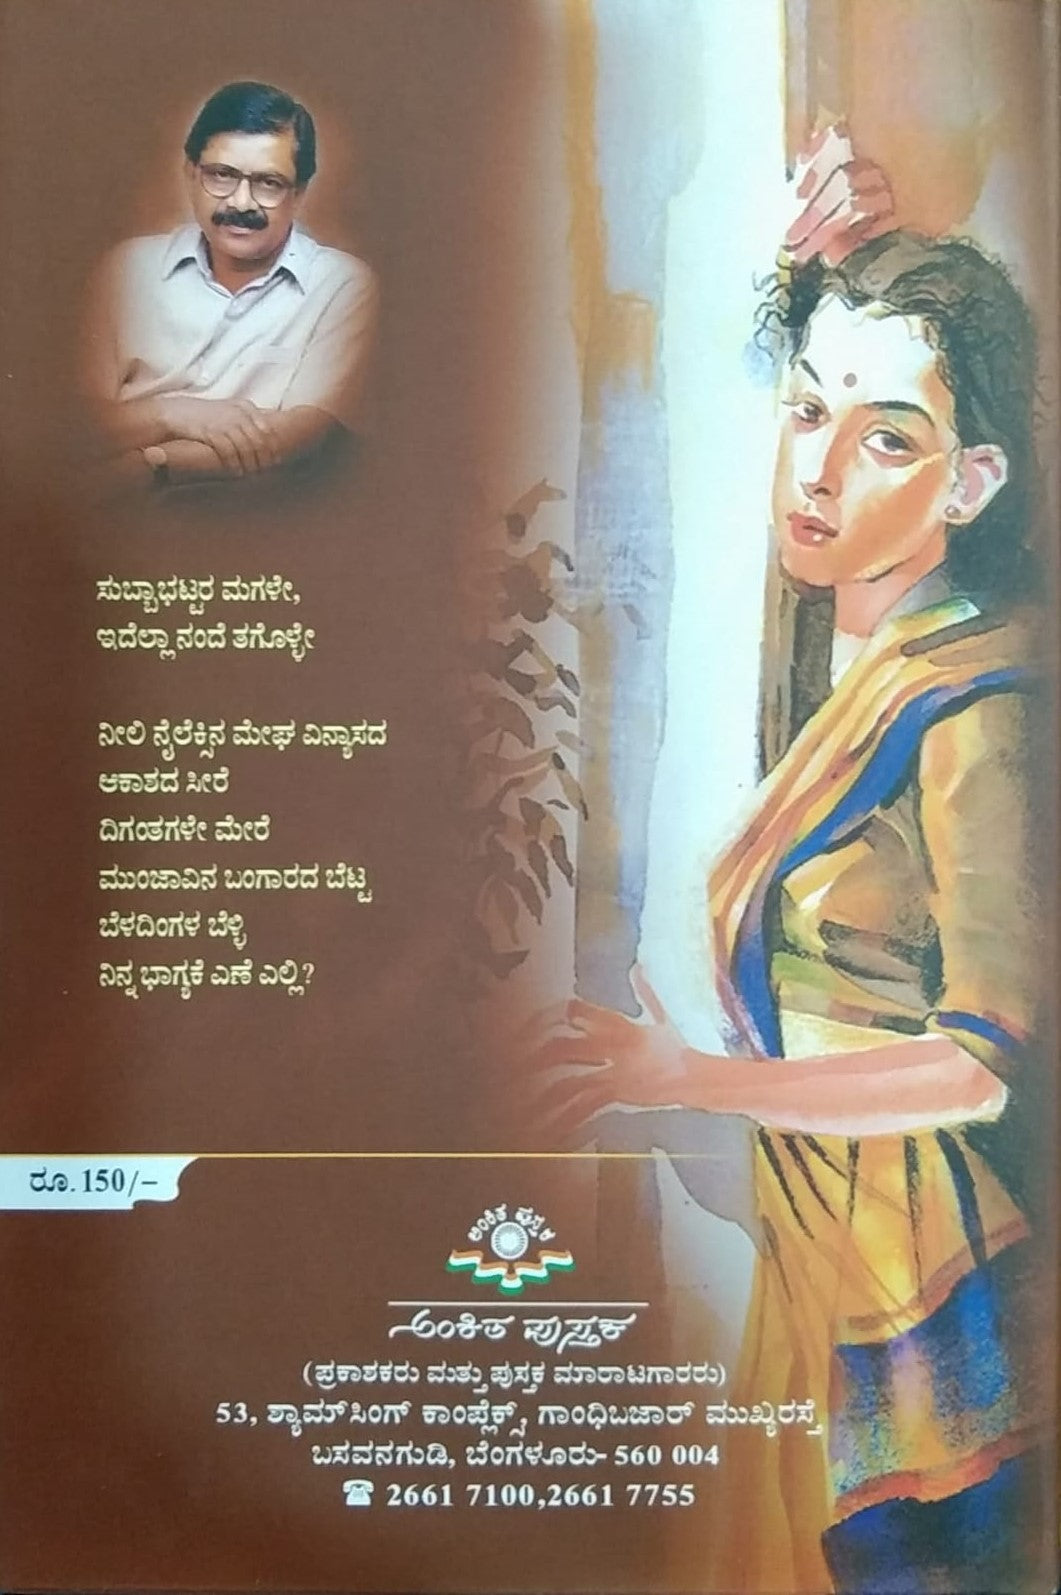 Title : Subbabhattara Magale is a Collection of Poems Written by B. R. Lakshmanrao and Published by Ankita Pustaka